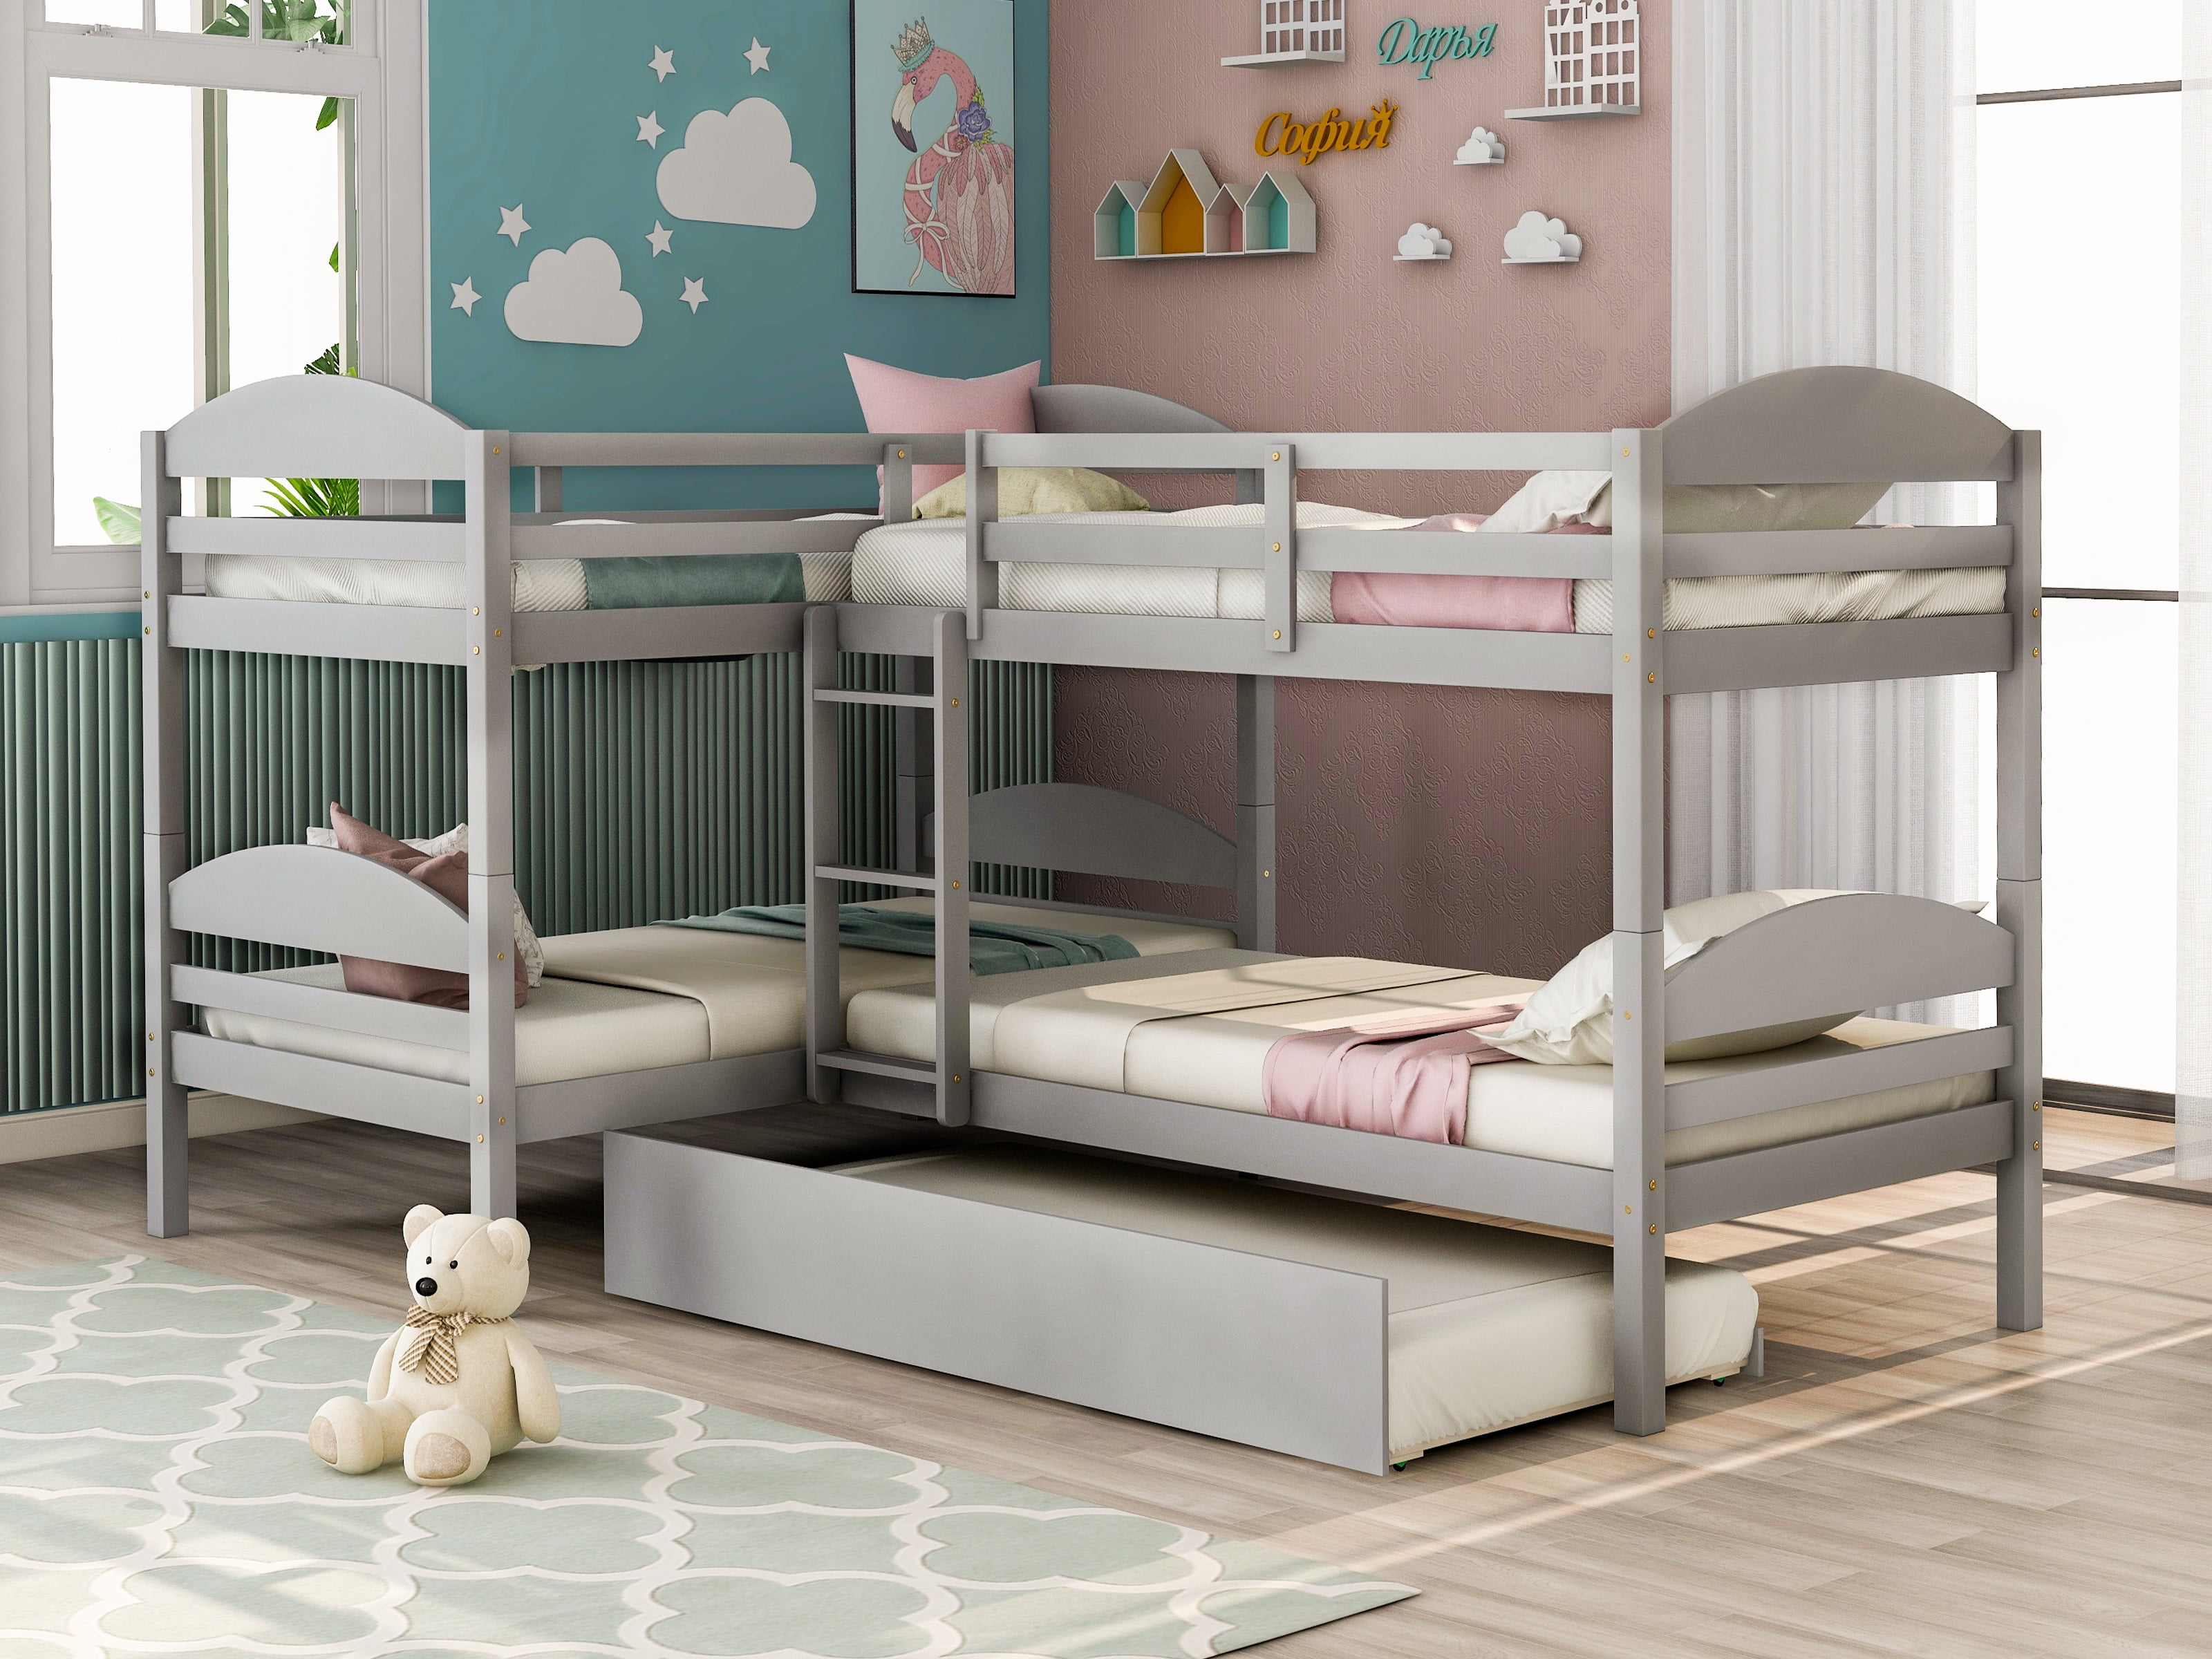 L Shaped Corner Bunk Bed With Trundle, Corner Twin Beds With Trundle